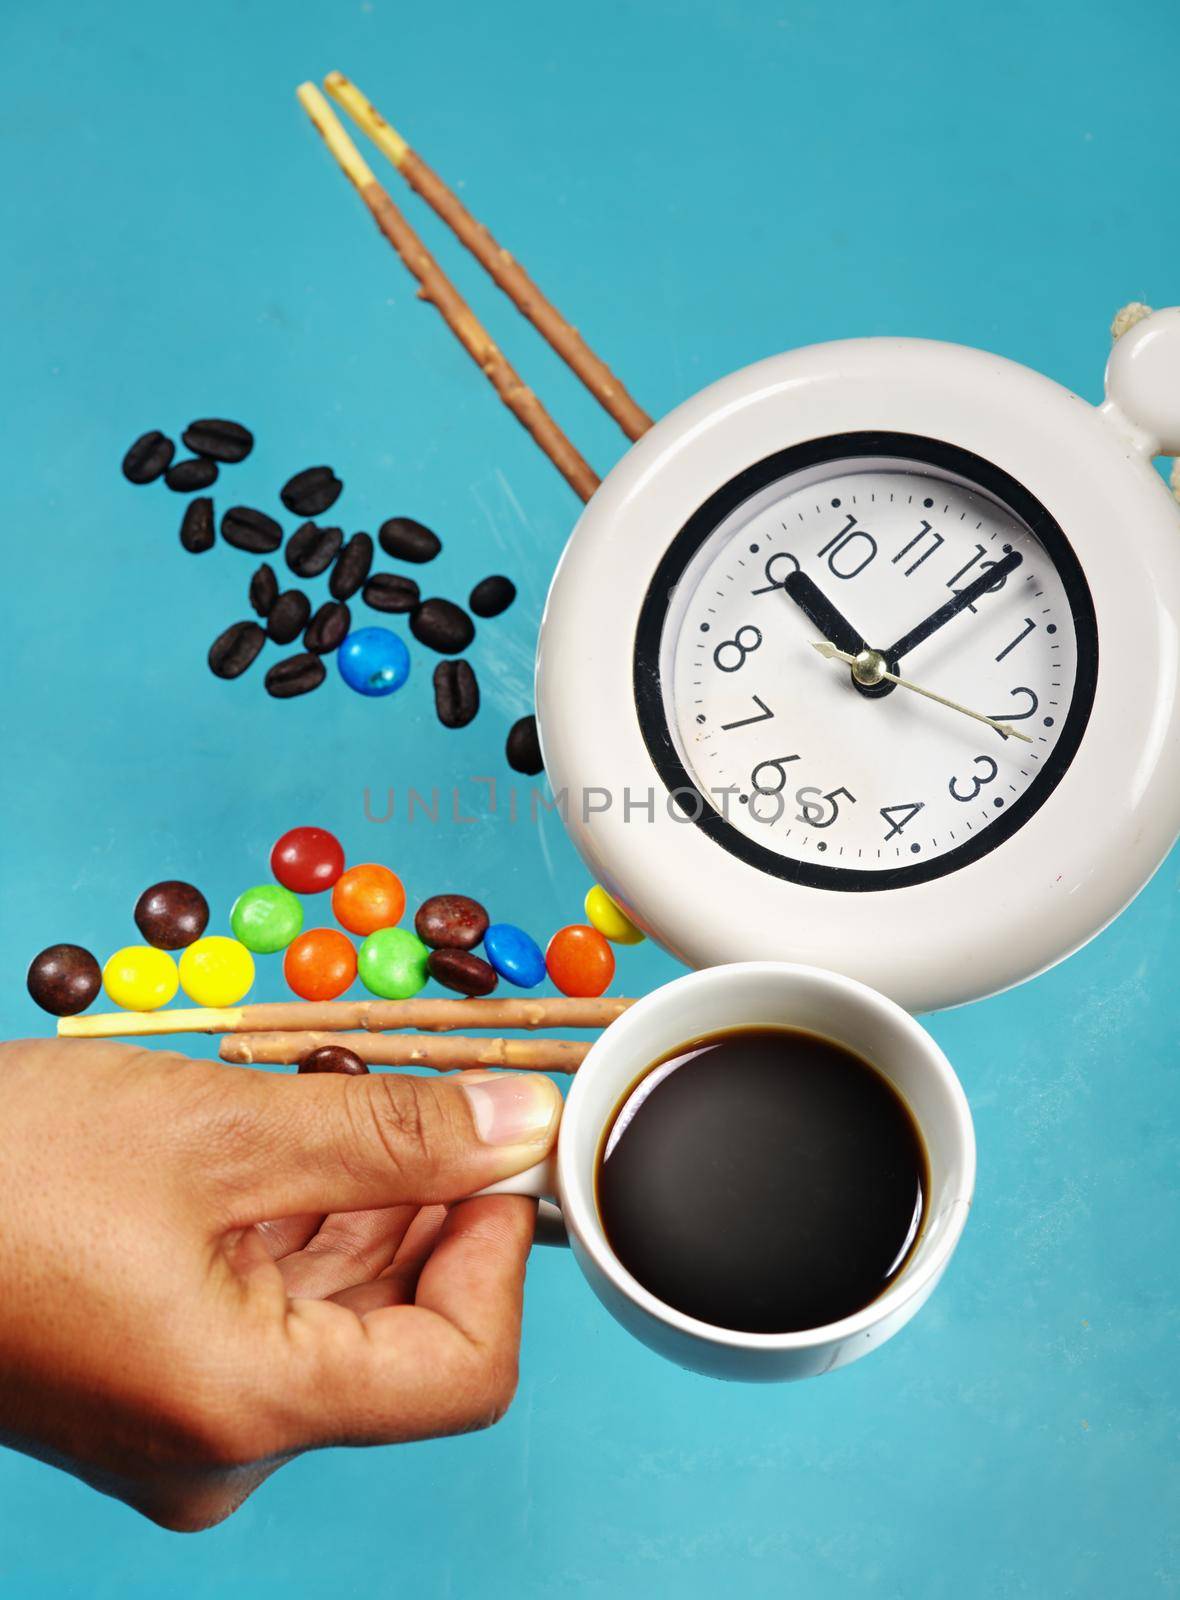 Man hand holding espresso cup with alarm clock on confectionery and sweet candy background.